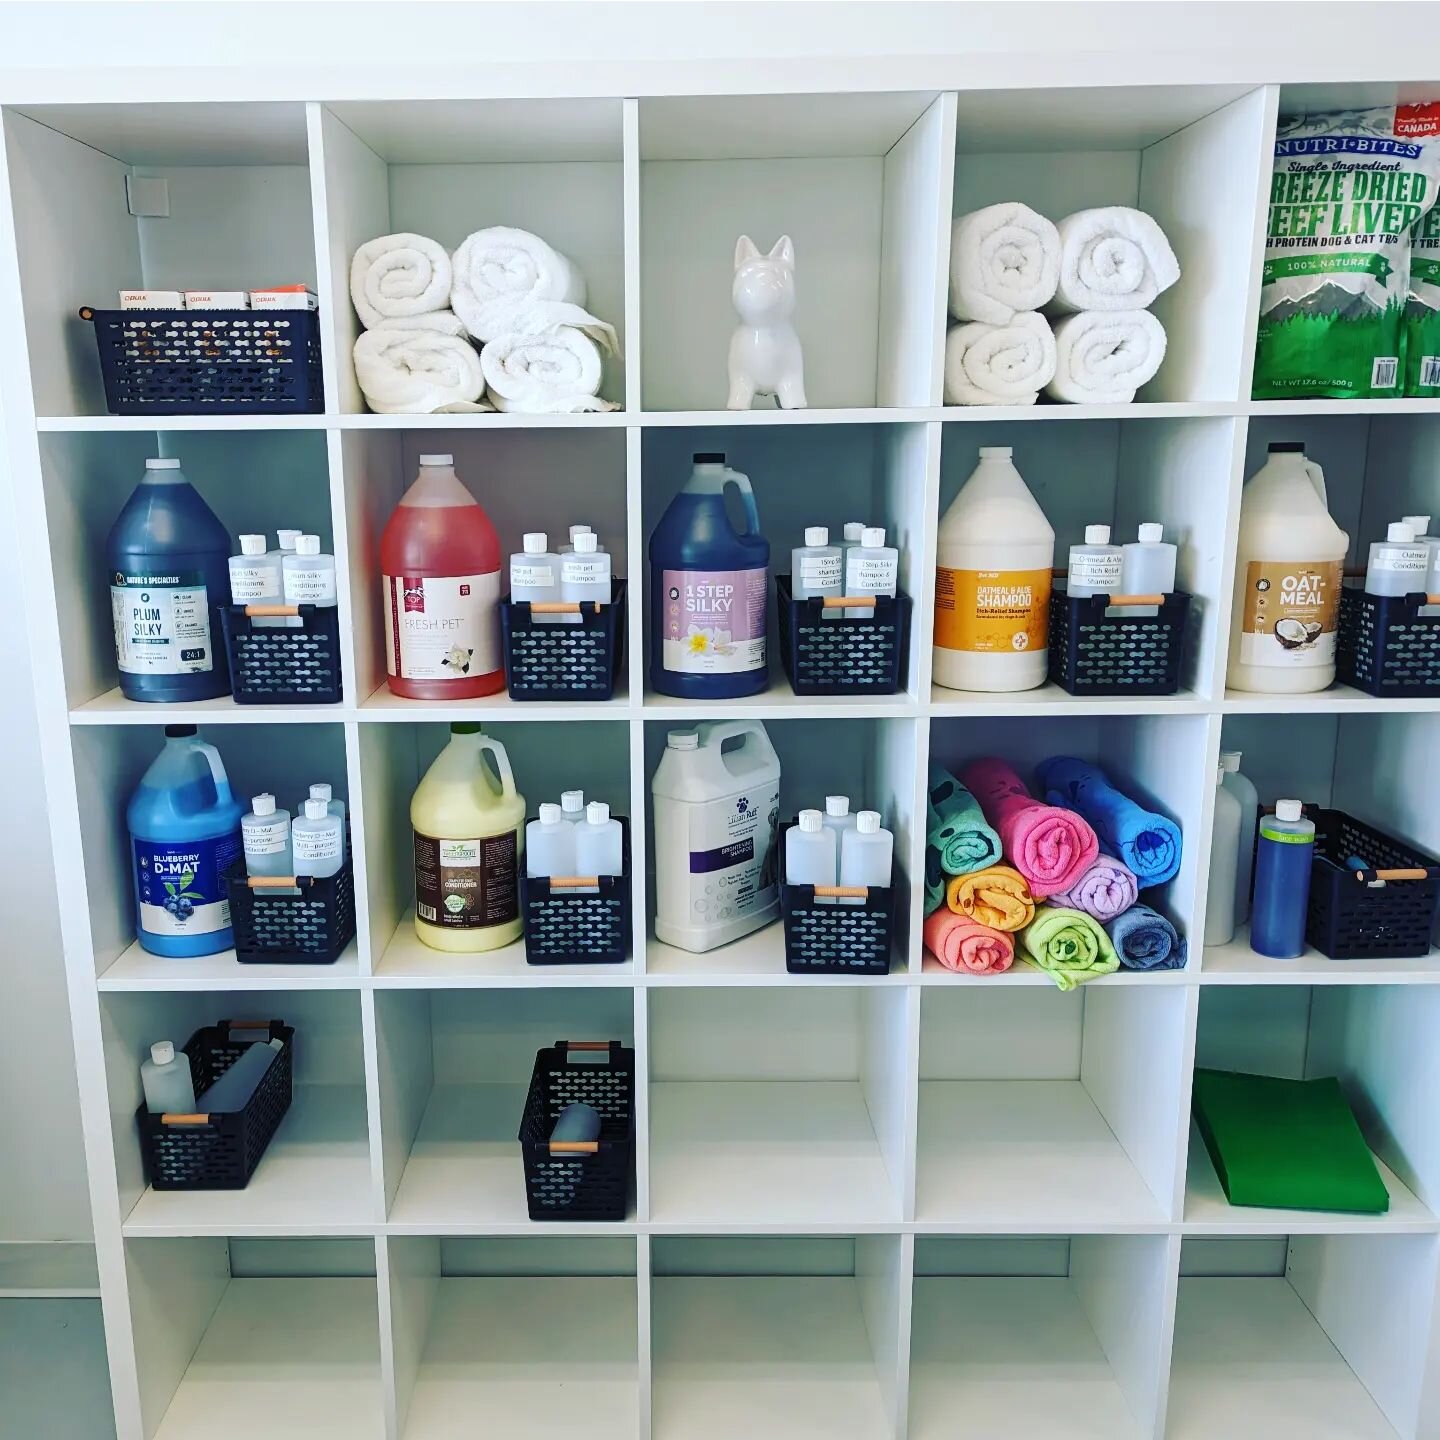 Shampoo, conditioner and face wash for all kinds of pups.  Thank you everyone for stopping in on our first week.  If you haven't stopped by yet, come check us out and try our washes.